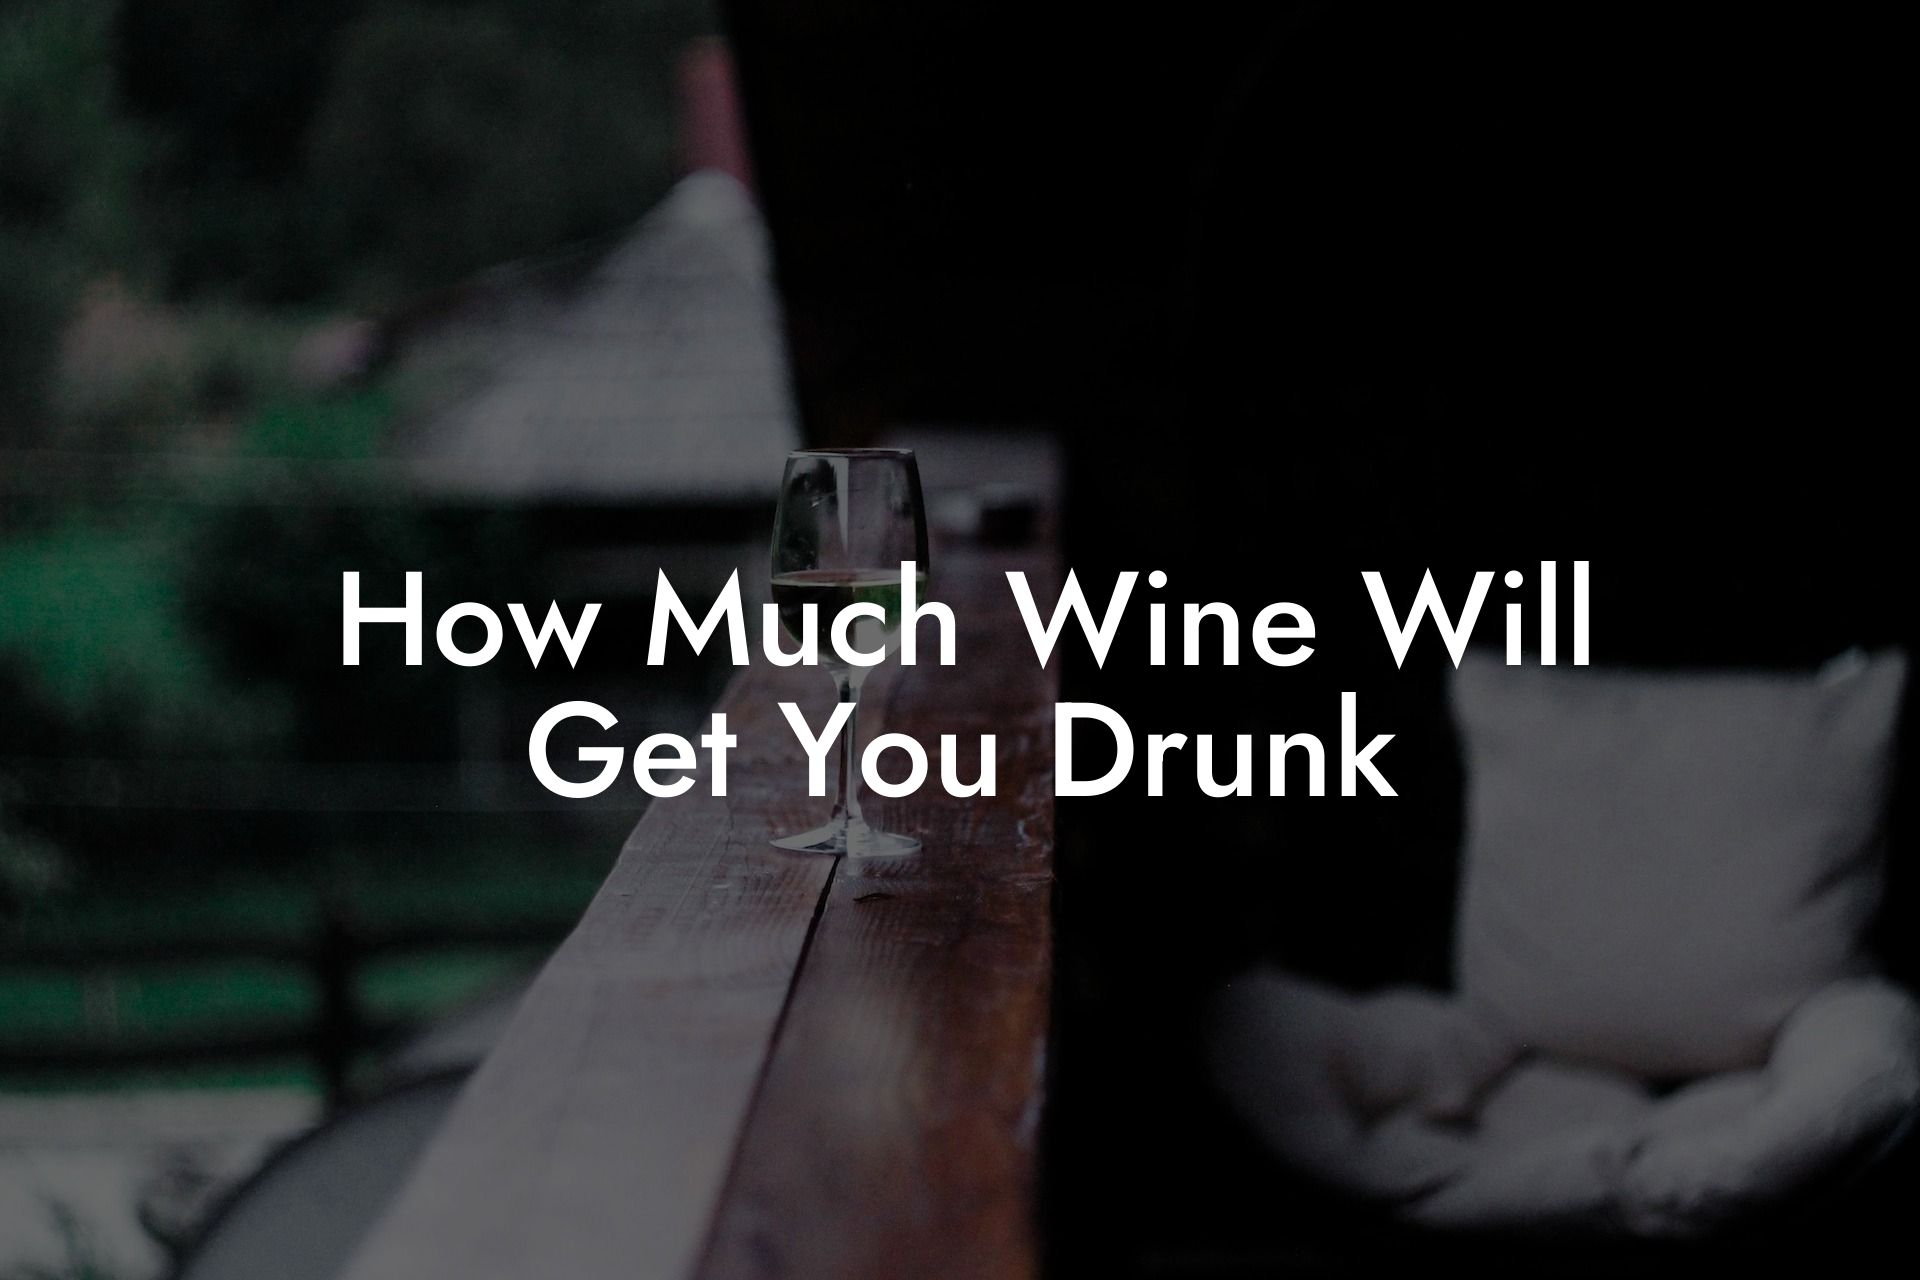 How Much Wine Will Get You Drunk